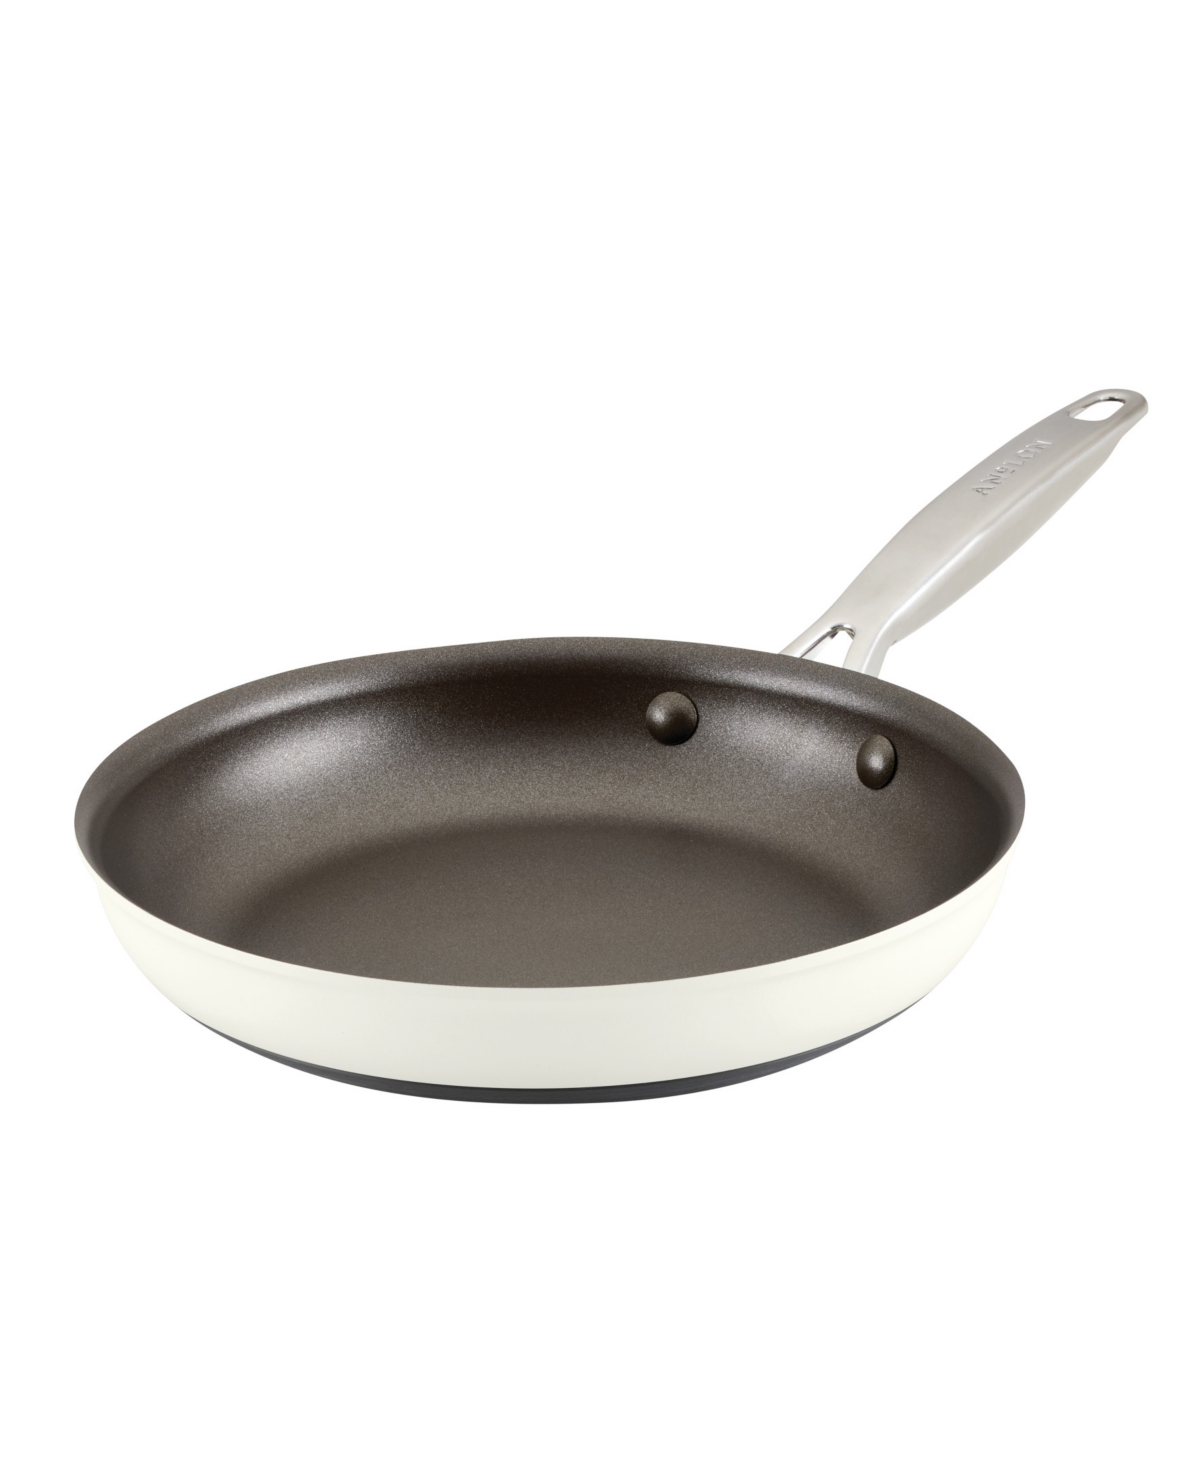 Anolon Achieve 10in Hard Anodized Nonstick Frying Pan In Cream